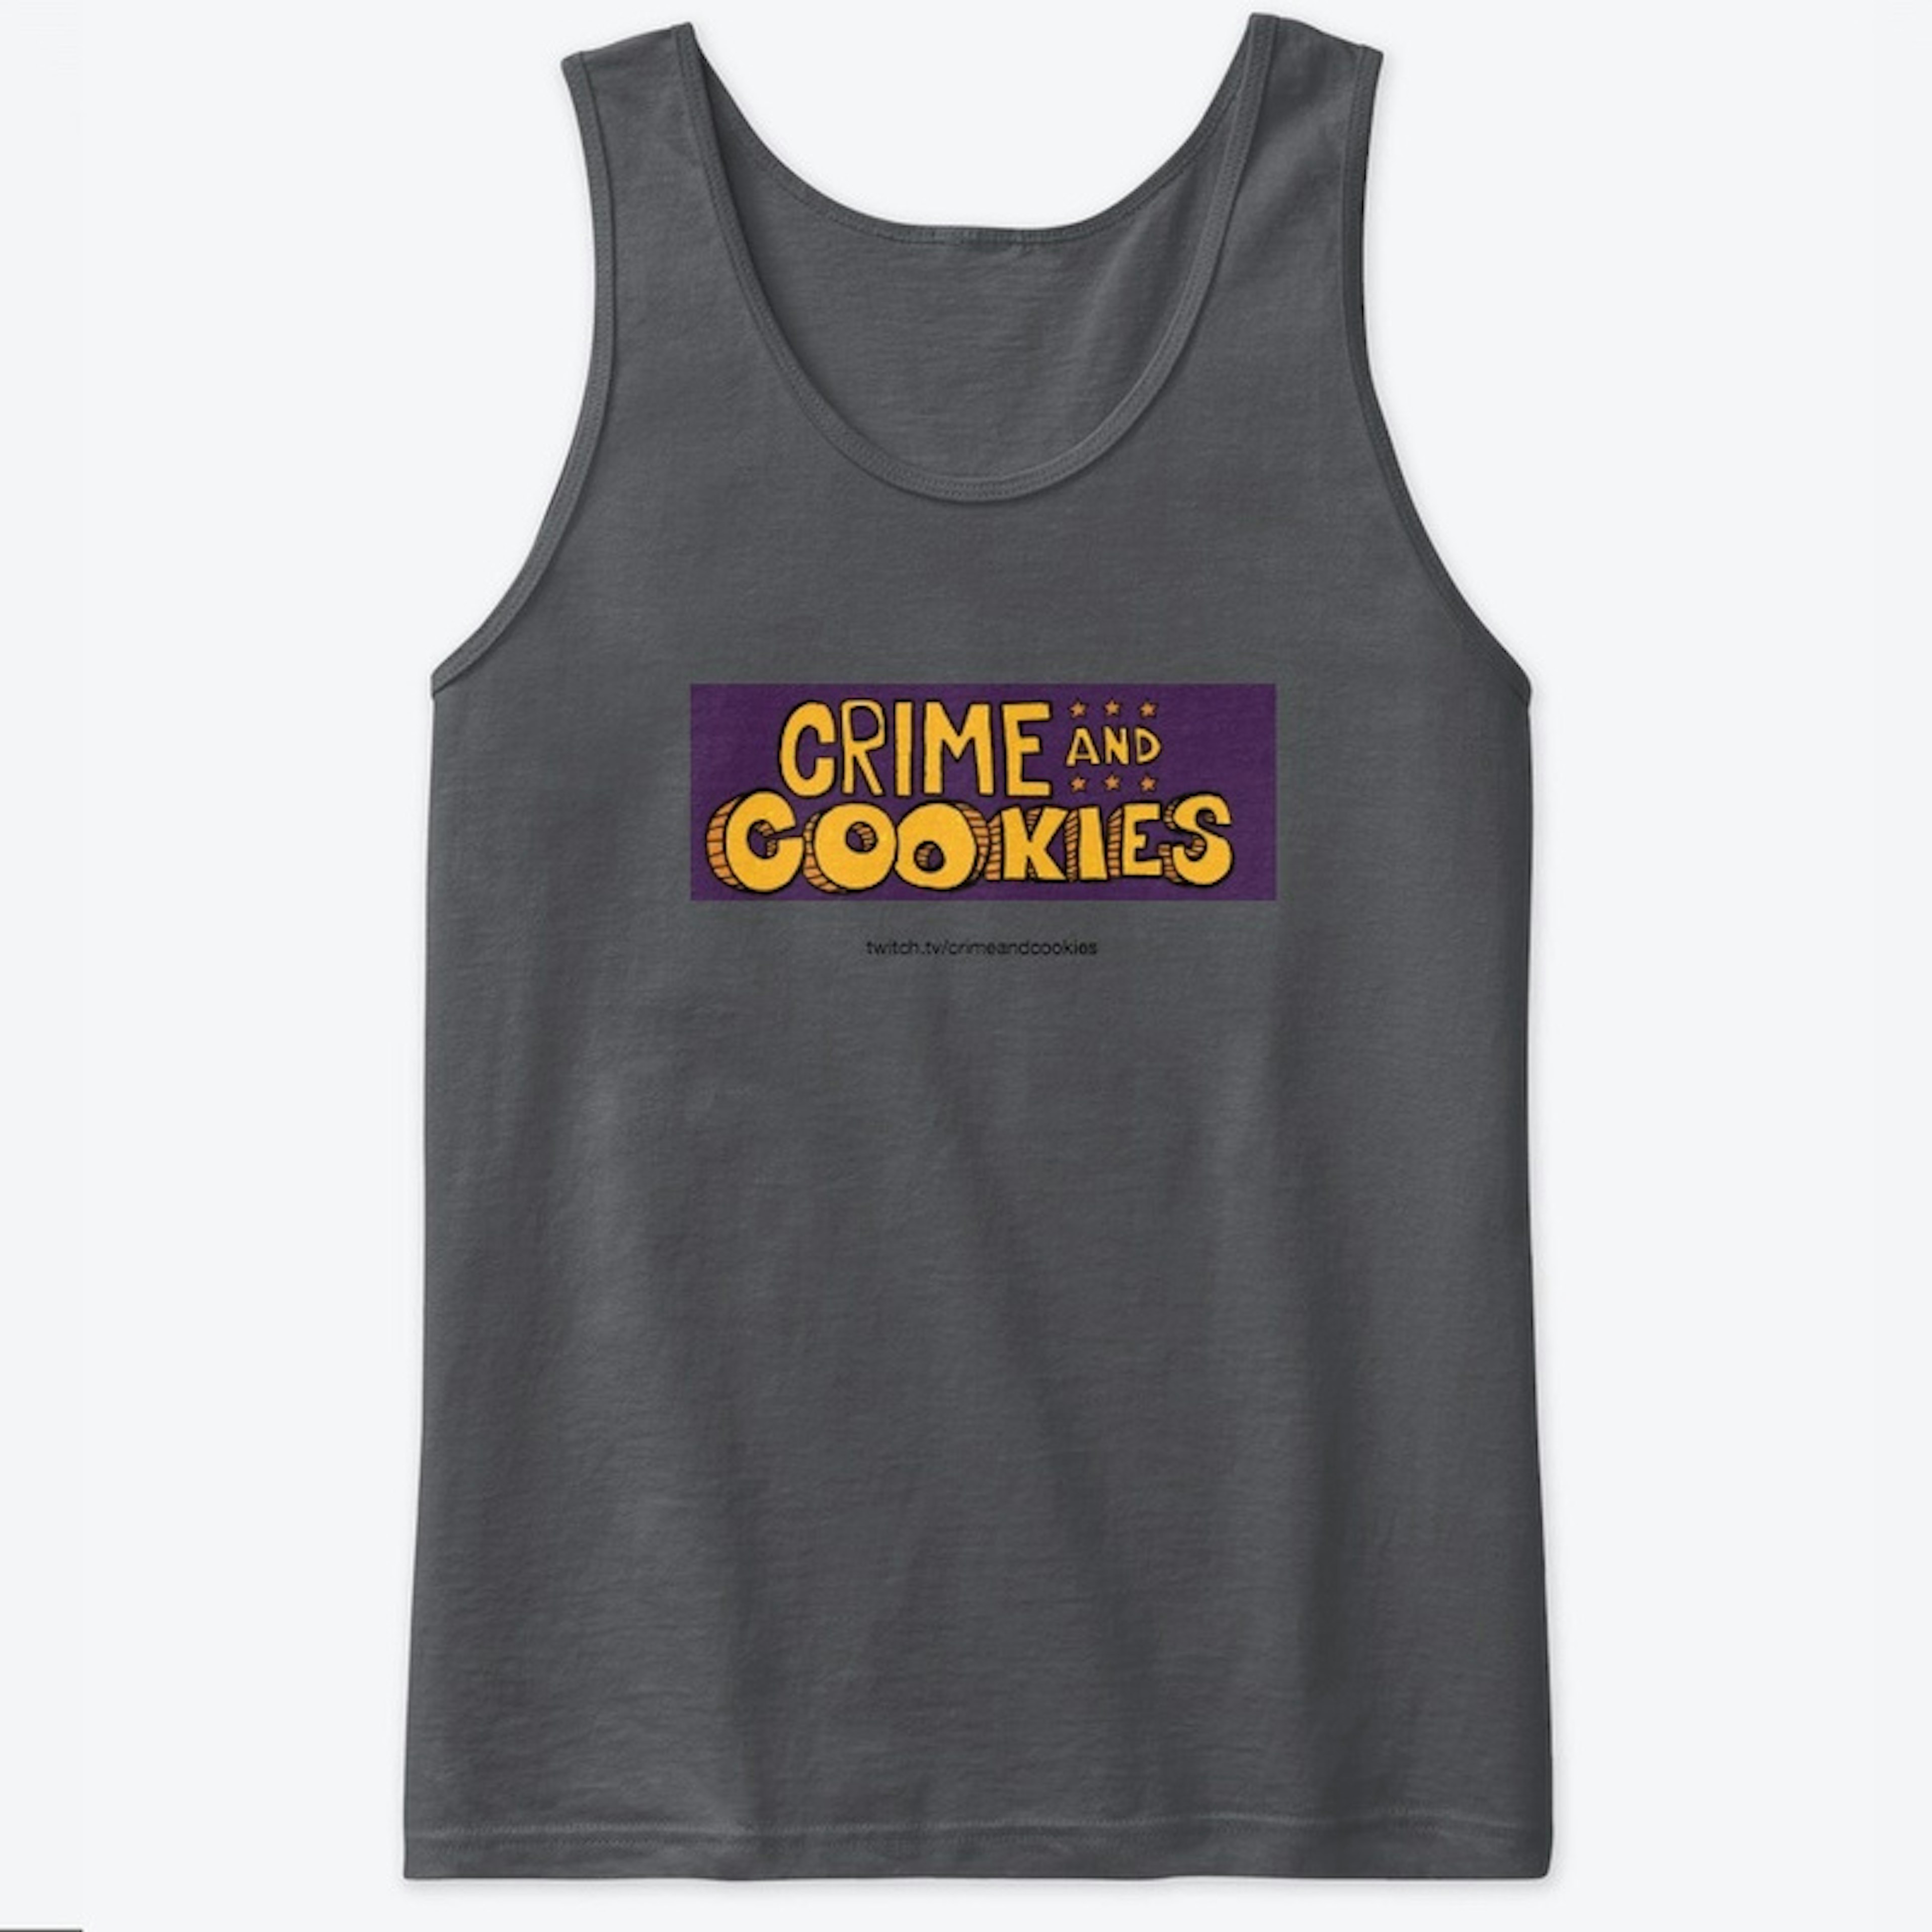 Crime and Cookies Logo